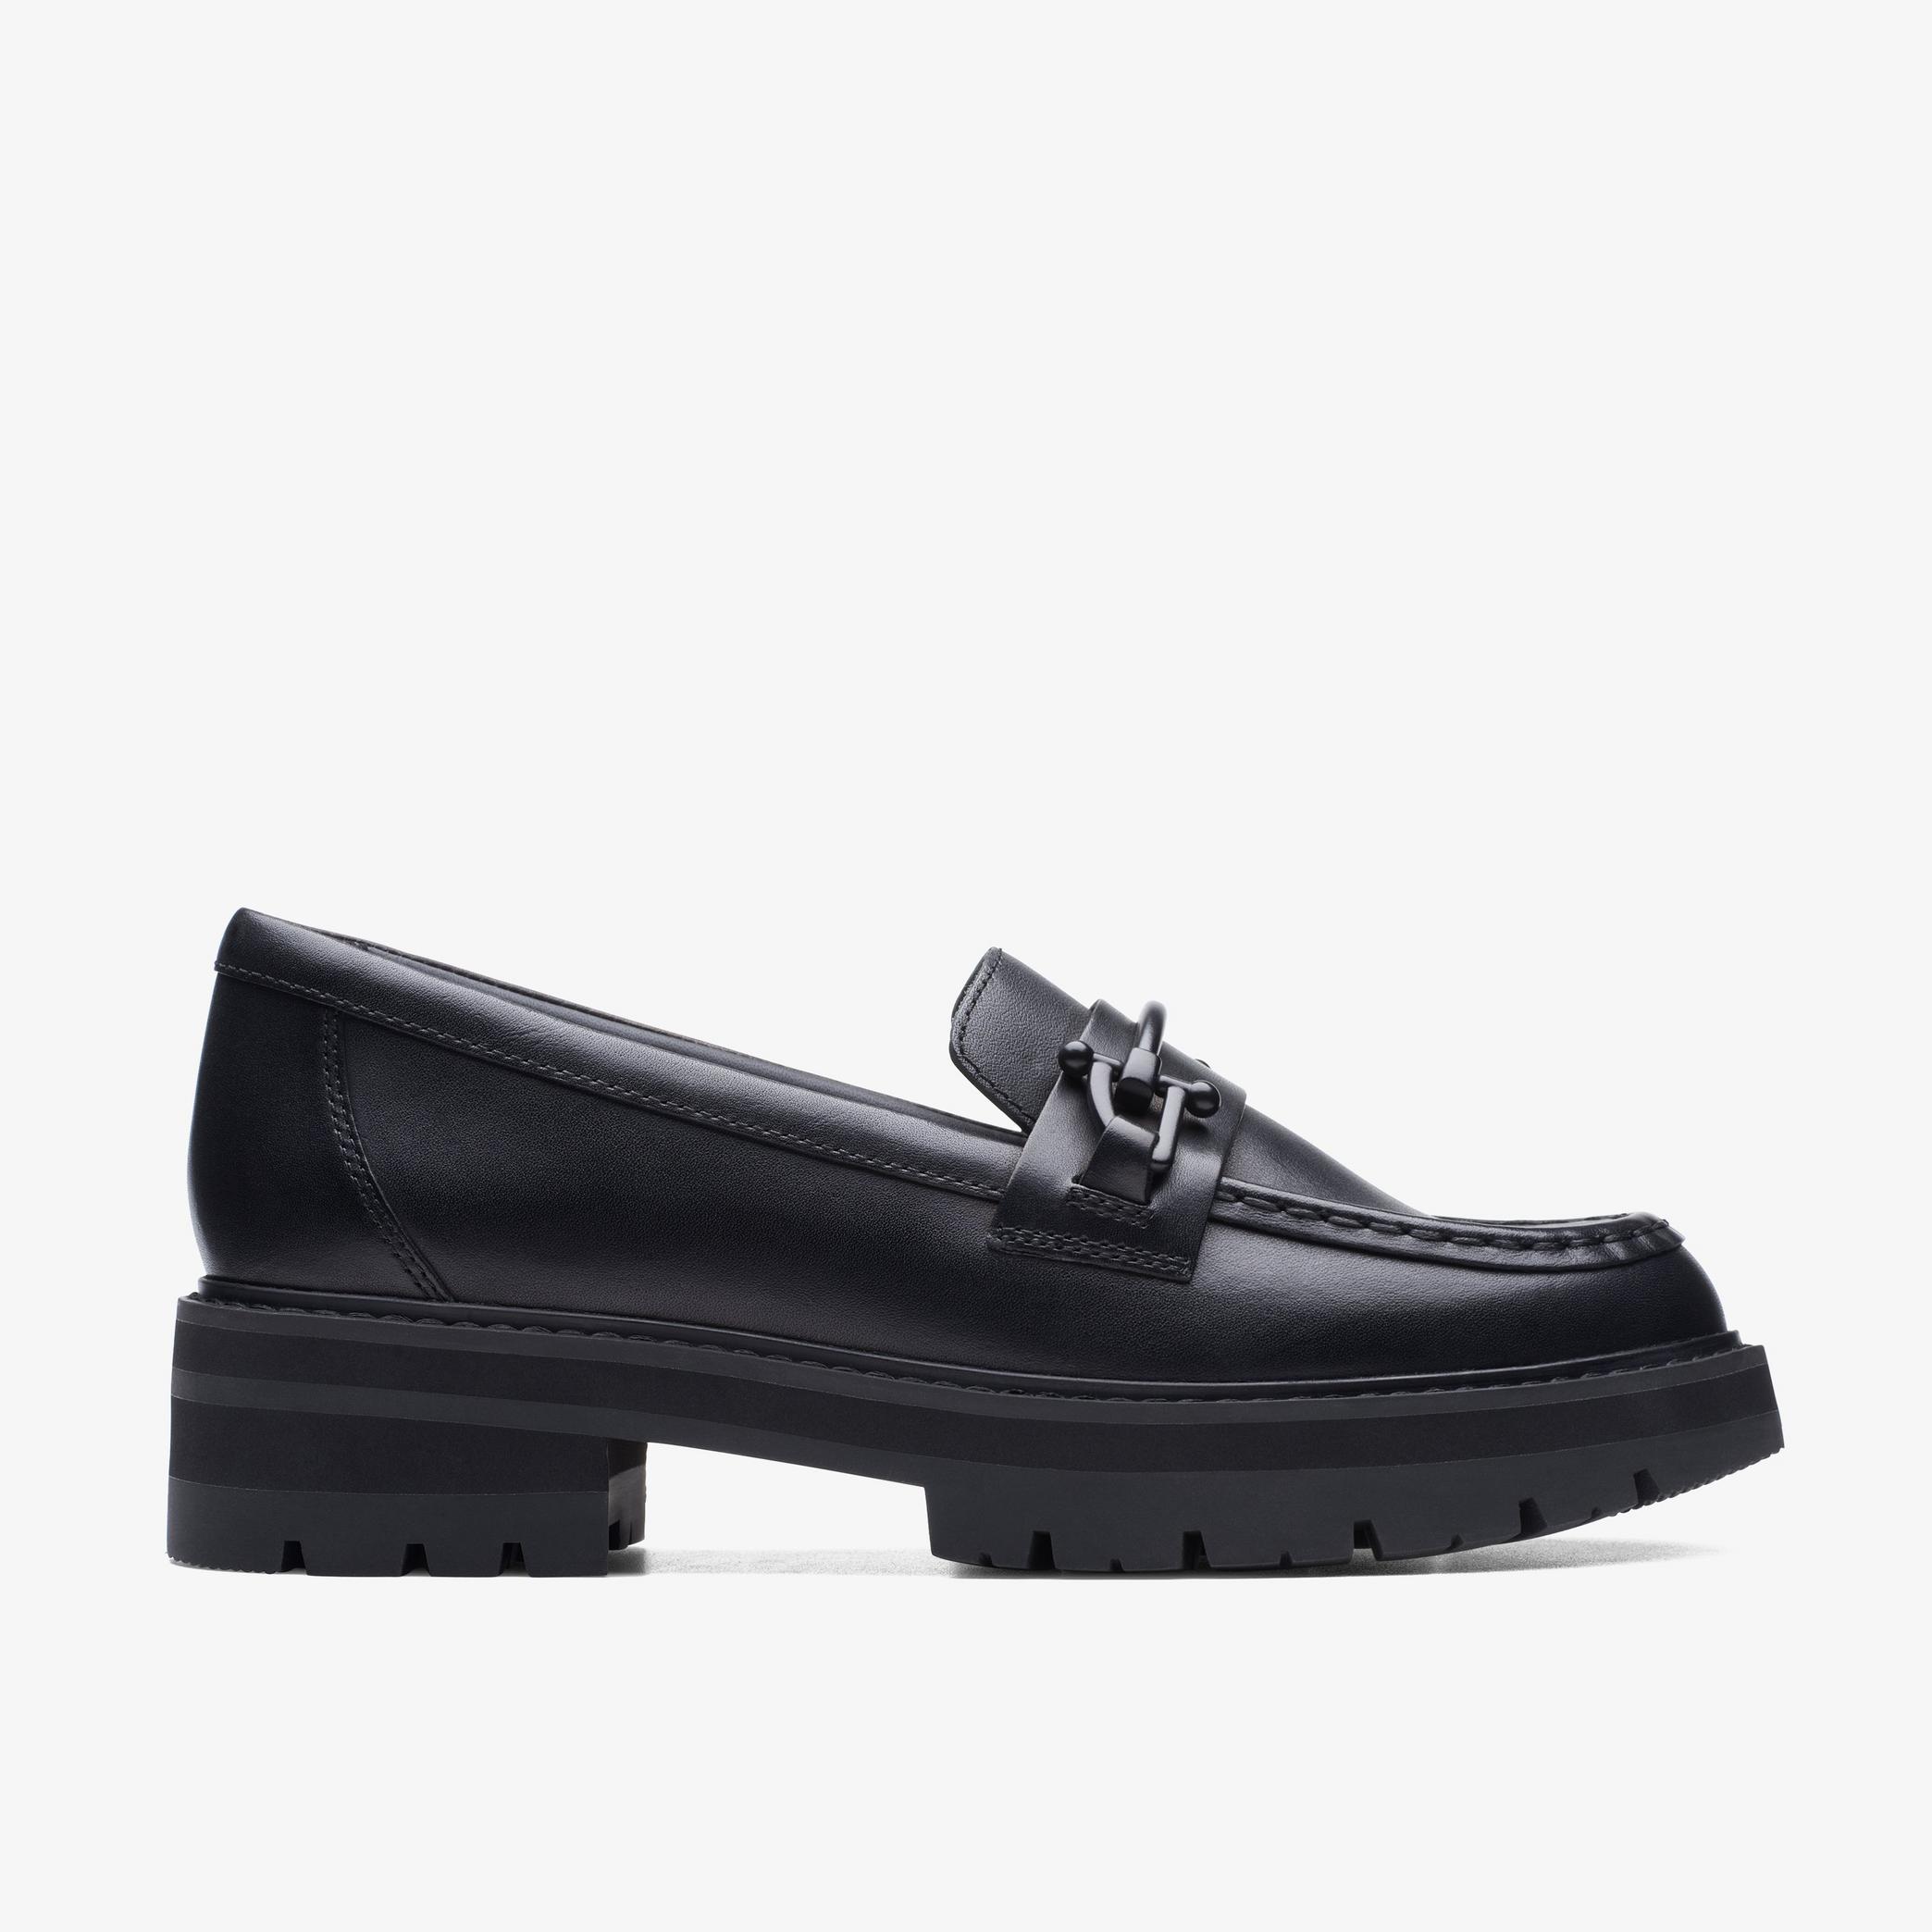 WOMENS Orianna Bit Black Leather Loafers | Clarks US